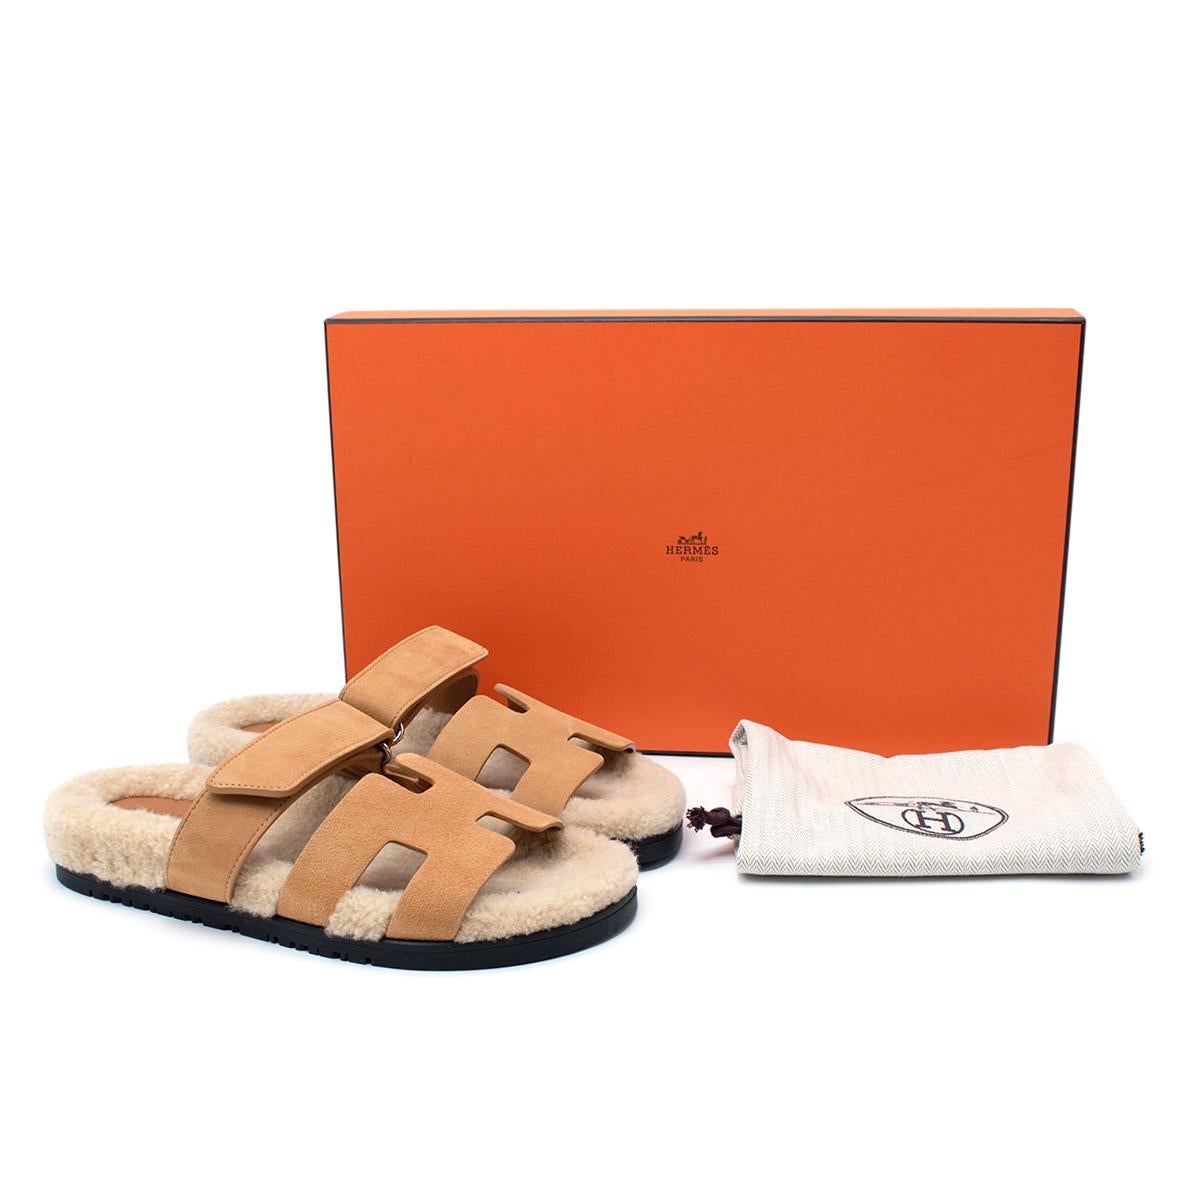 Hermes Chypre Tan Suede Sandals - Sold Out/Rare

- Adjustable velcro strap
- Soft ecru wool skin insole
- Golden beige goatskin lining
- Black rubber sole

Materials:
Rubber sole
Woolskin insole
Goatskin lining 

Made in Italy

PLEASE NOTE, THESE